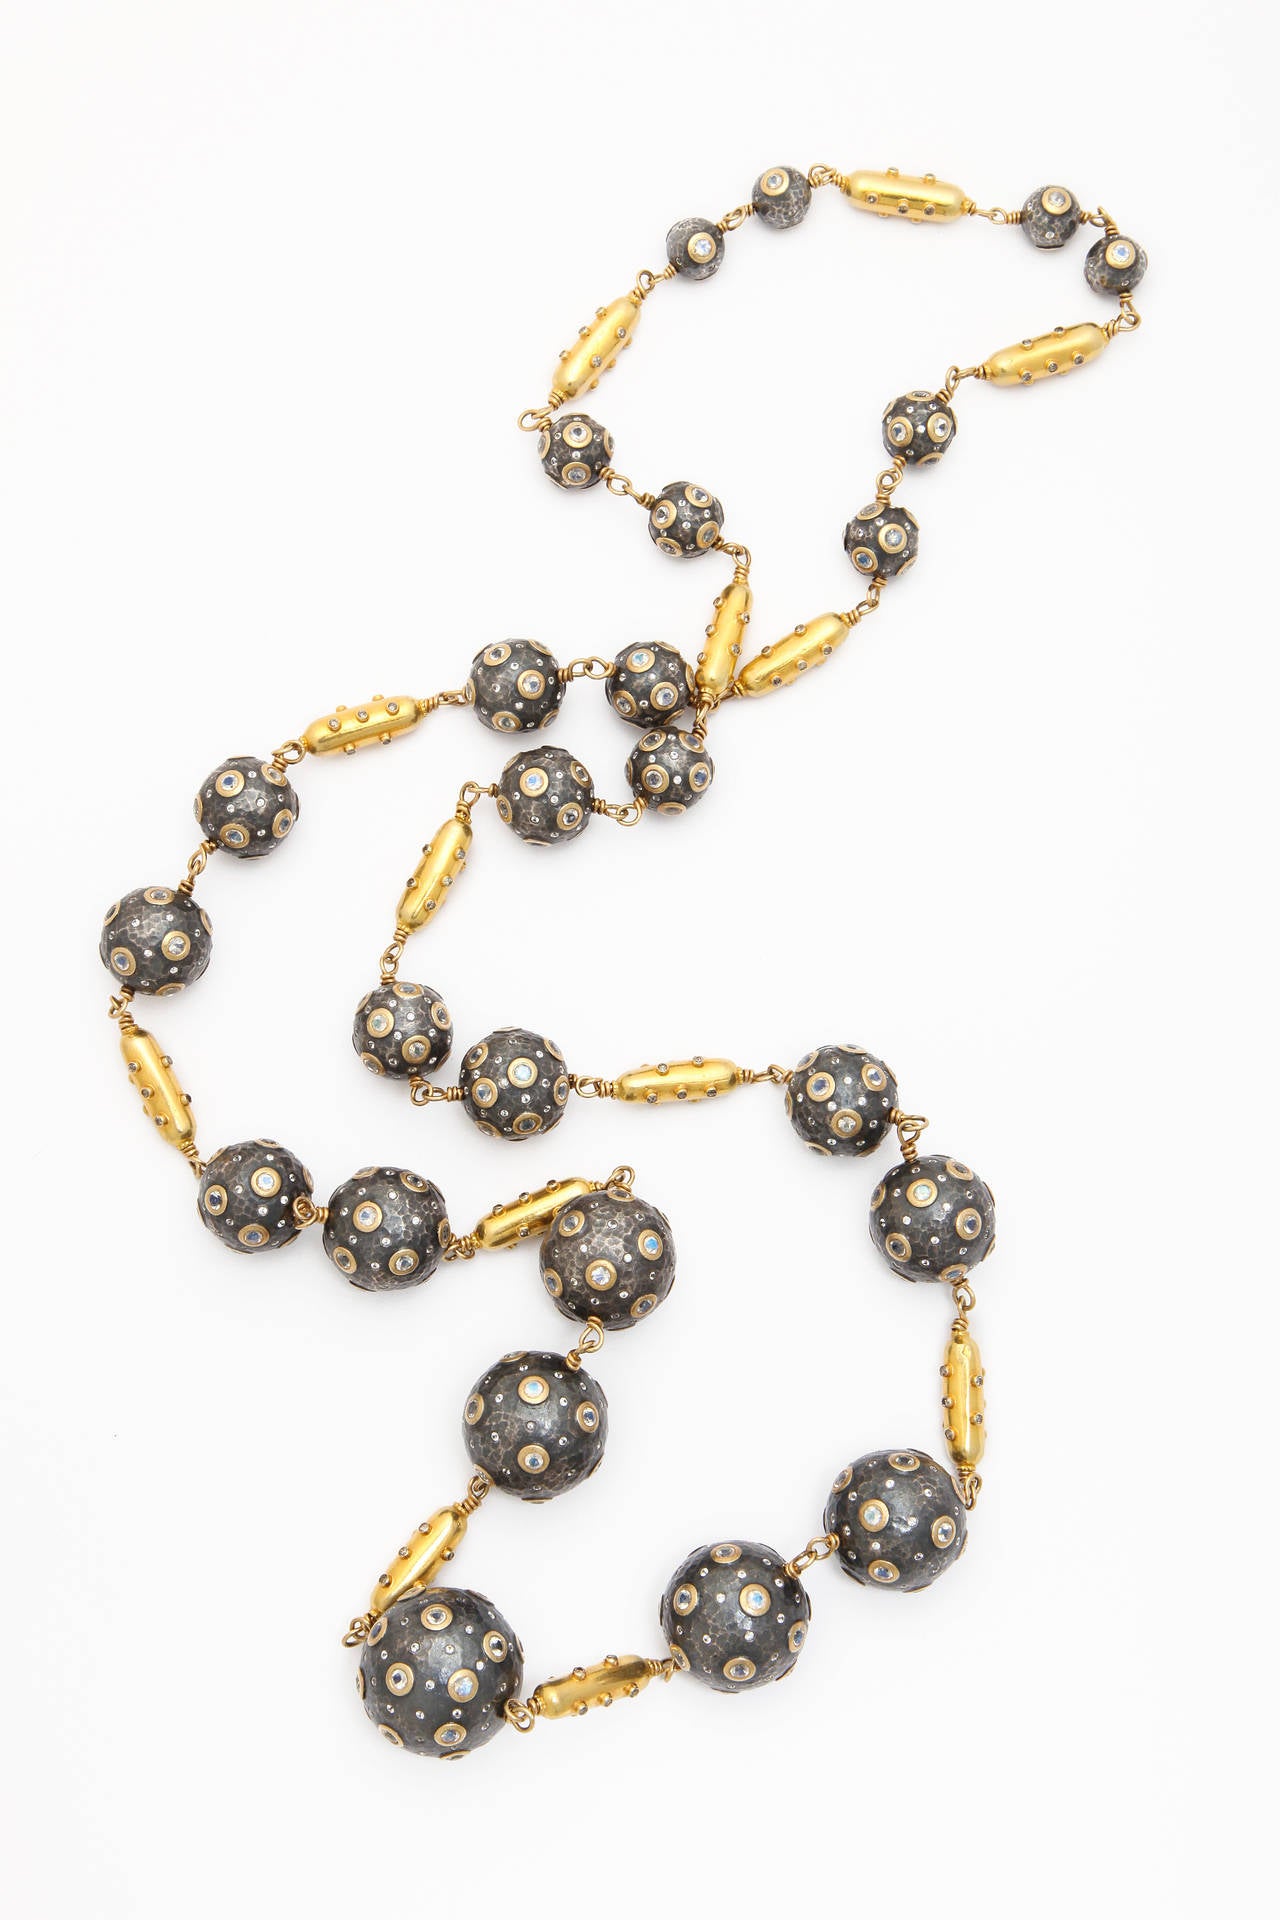 A necklace composed of 18kt yellow gold and diamond capsule beads and rhodium plated sterling silver beads set with gold bezel set moonstones and white sapphires. The beads are linked together by a handmade 18kt yellow gold chain.There are 11.60cts